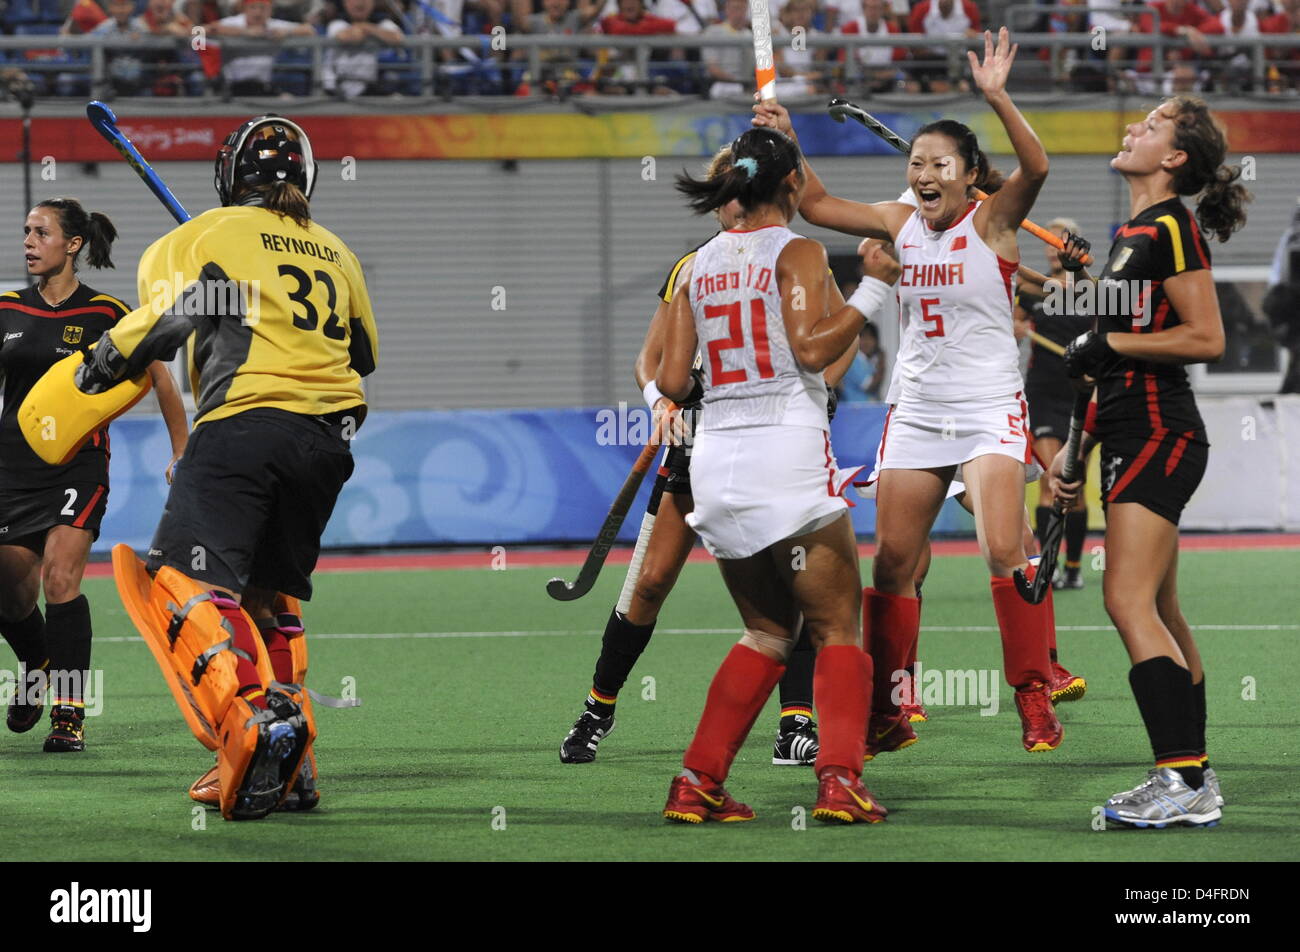 Yudiao Zhao (3rd L) from China is celebrated by teammate Hui Cheng after she has scored the 3:2 winning goal against goalkeeper Kristina Reynolds (L) of Germany during the Semifinal match Germany against China in the womenÒs Field Hockey competition at the Beijing 2008 Olympic Games, Beijing, China, 20 August 2008. Photo: Peer Grimm dpa ###dpa### Stock Photo